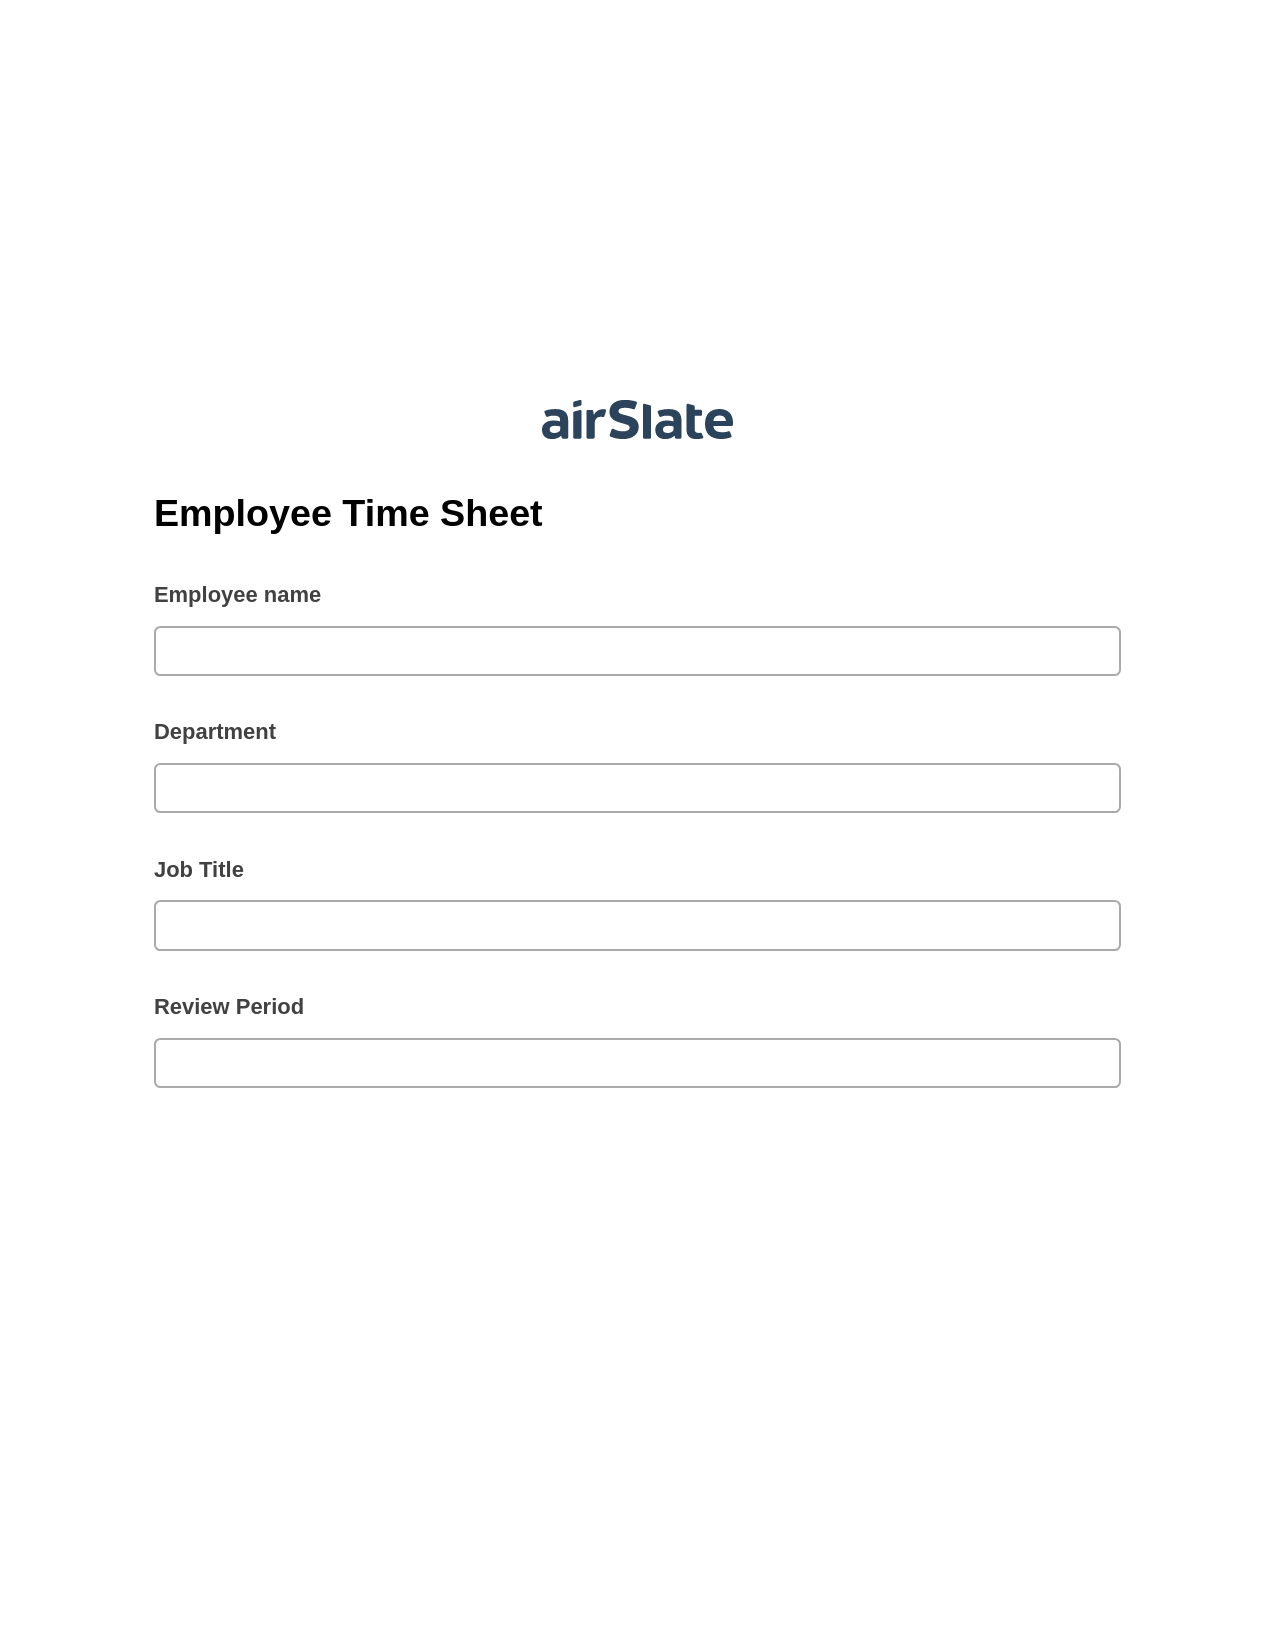 Multirole Employee Time Sheet Pre-fill Dropdowns from Excel Bot, System Bot - Create a Slate in another Flow, Export to WebMerge Bot